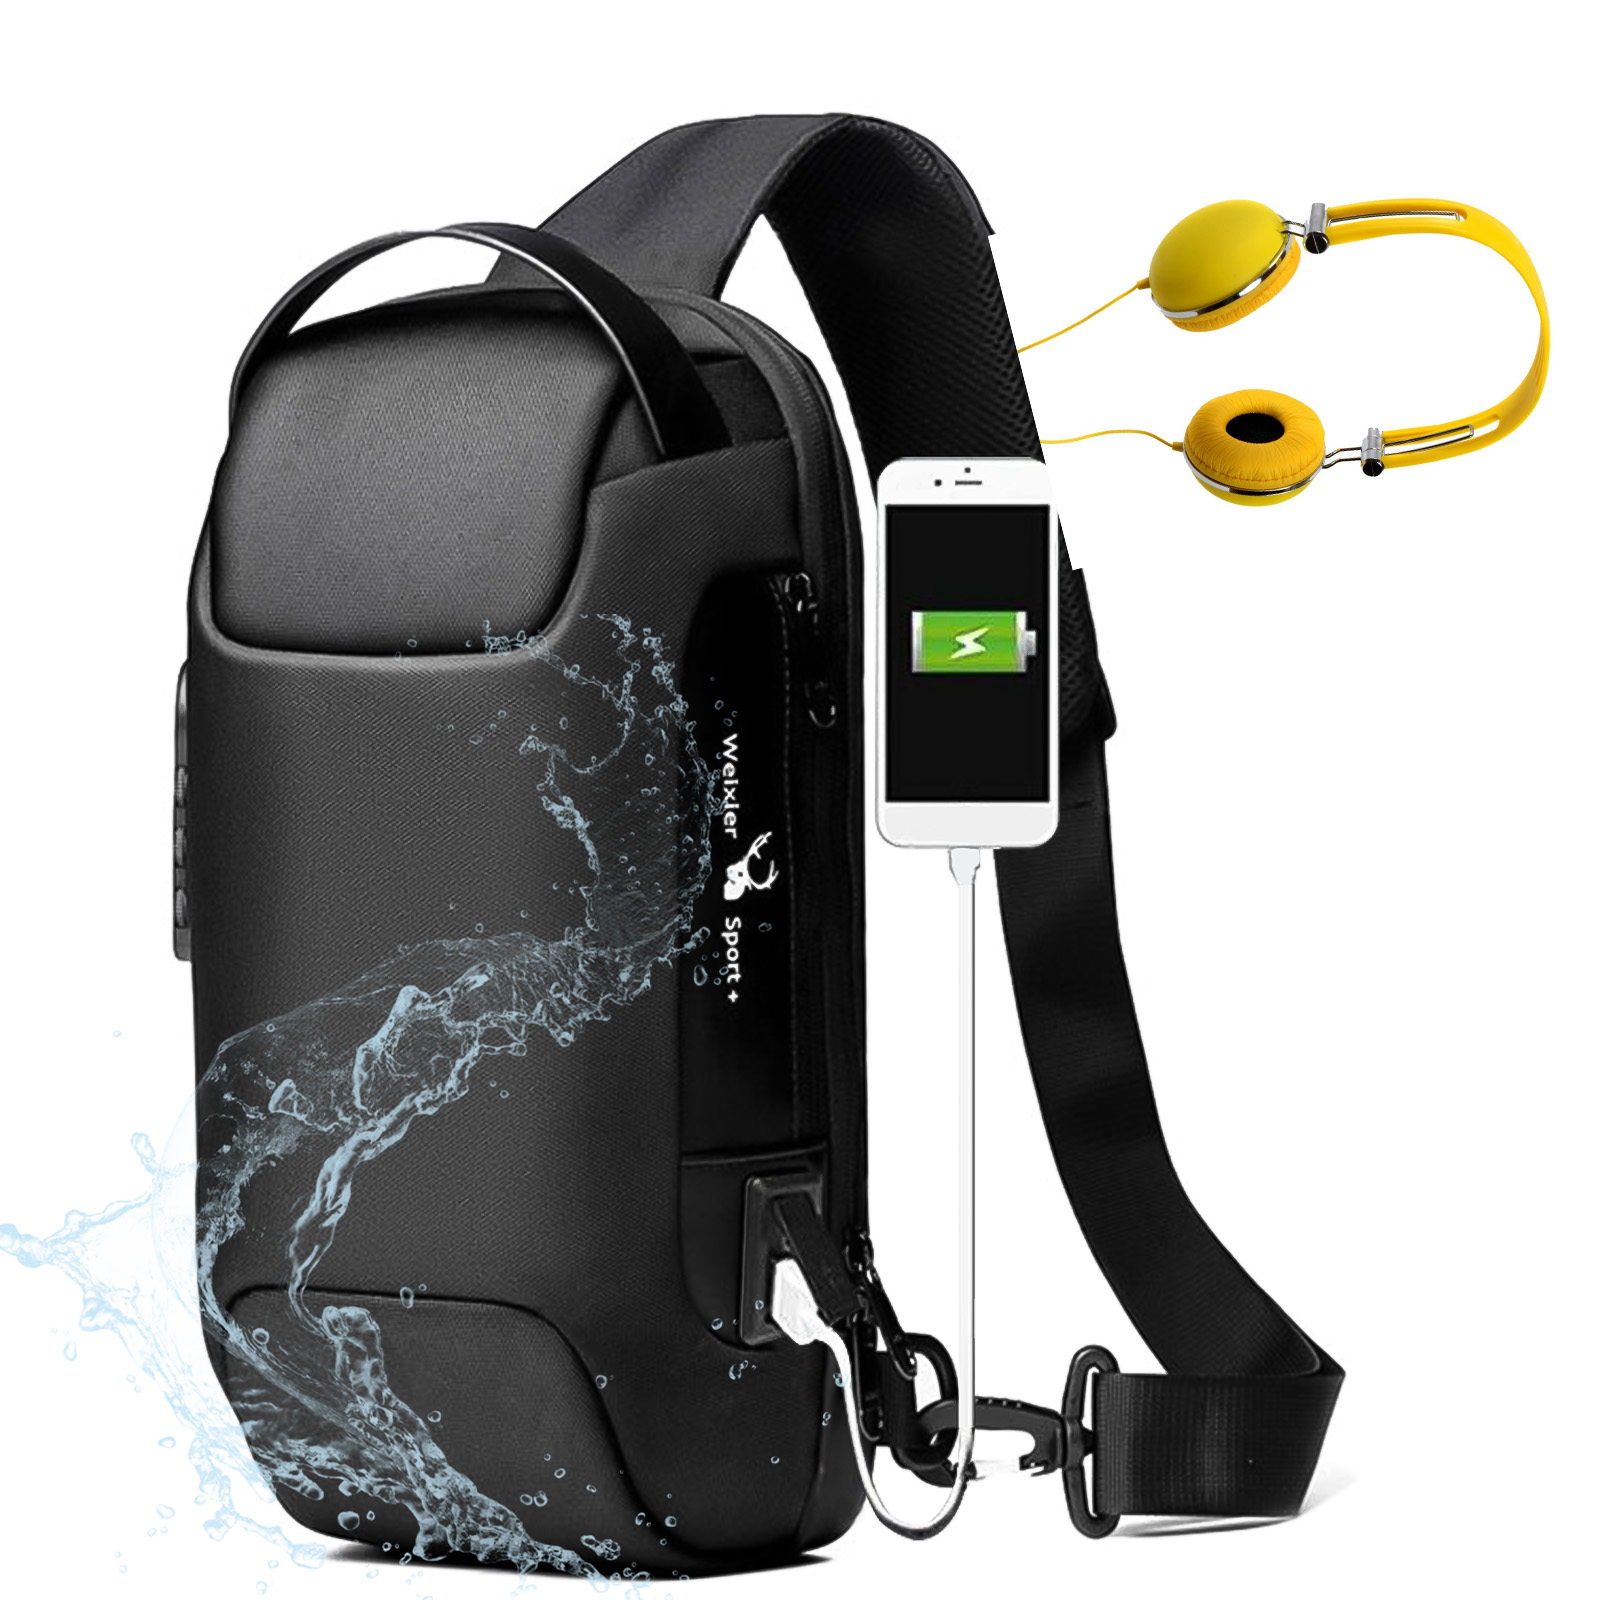 Anti-Theft Reflective Sling Bag Water-Resistant USB Shoulder Backpack Luminous Crossbody Bags for Men Casual Daypack 